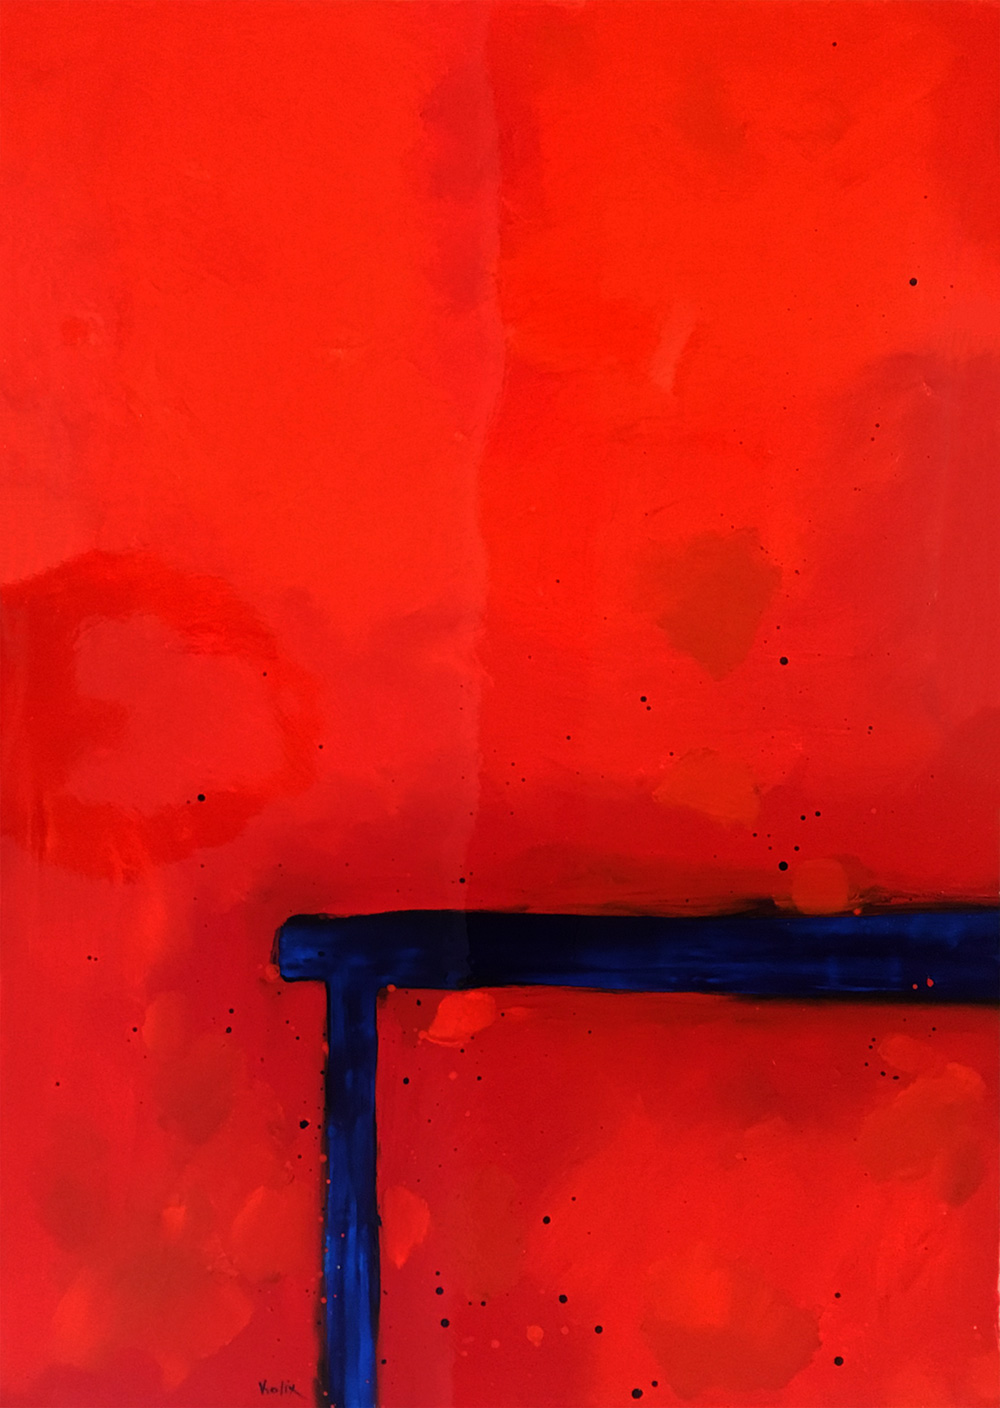 Table, a painting by Guido Vrolix